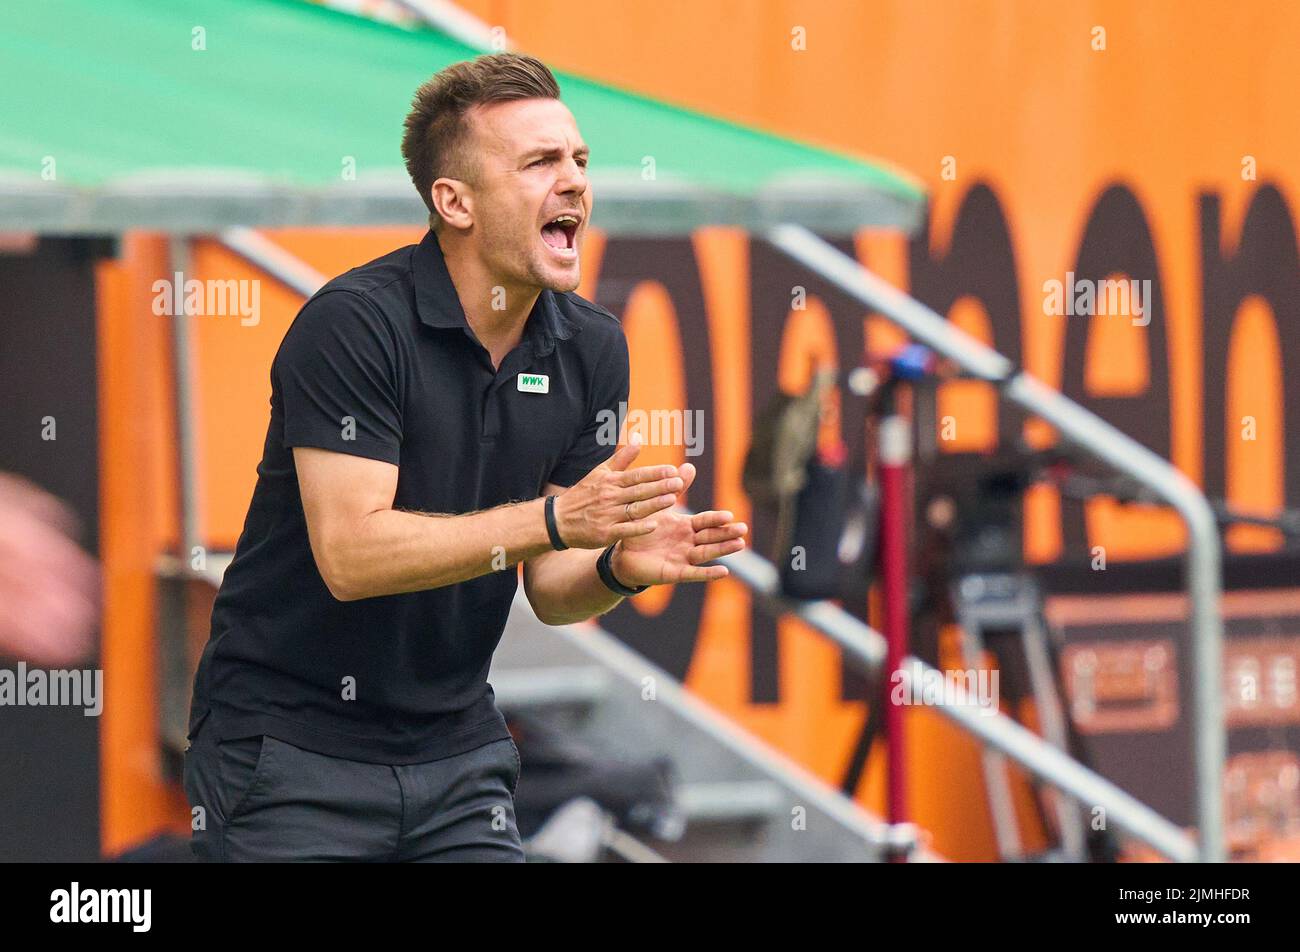 Enrico Maassen, FCA coach,  team manager,  in the match FC AUGSBURG - SC FREIBURG 0-4 1.German Football League on Aug 06, 2022 in Augsburg, Germany. Season 2022/2023, matchday 1, 1.Bundesliga, FCB, Munich, 1.Spieltag © Peter Schatz / Alamy Live News    - DFL REGULATIONS PROHIBIT ANY USE OF PHOTOGRAPHS as IMAGE SEQUENCES and/or QUASI-VIDEO - Stock Photo